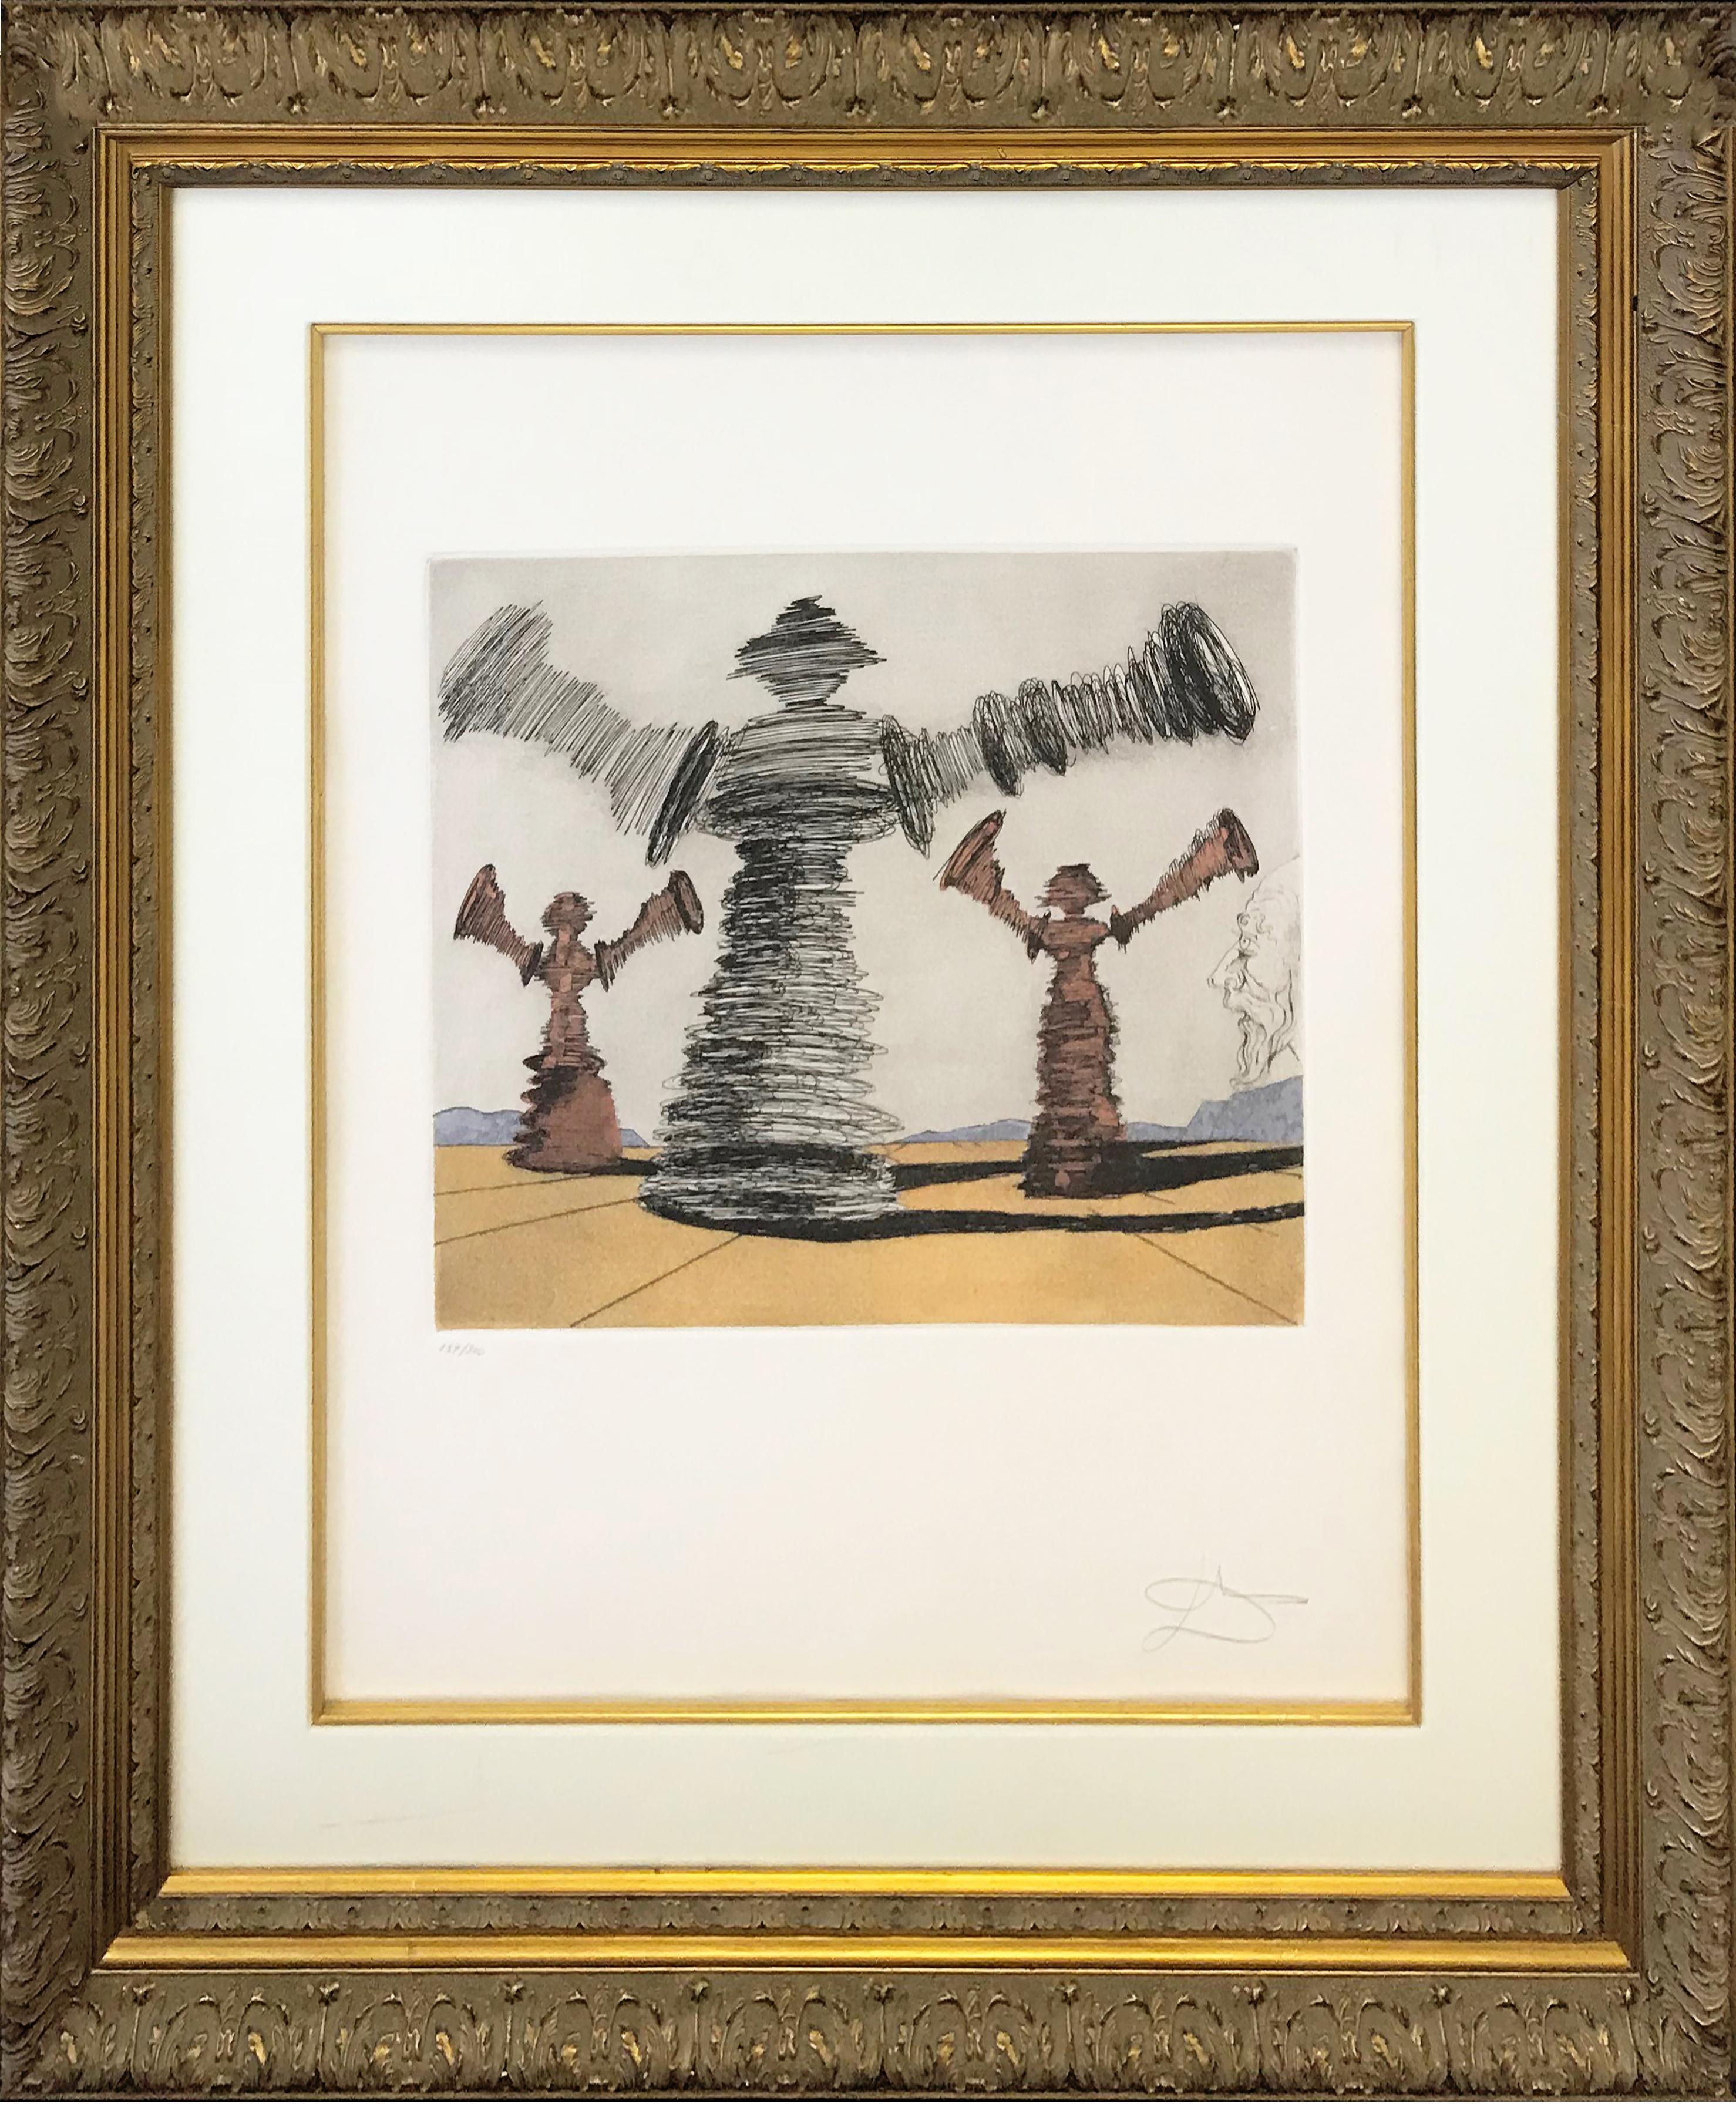 Salvador Dalí Figurative Print - THE SPINNING MAN (FRANK HUNTER AUTHENTICATED)